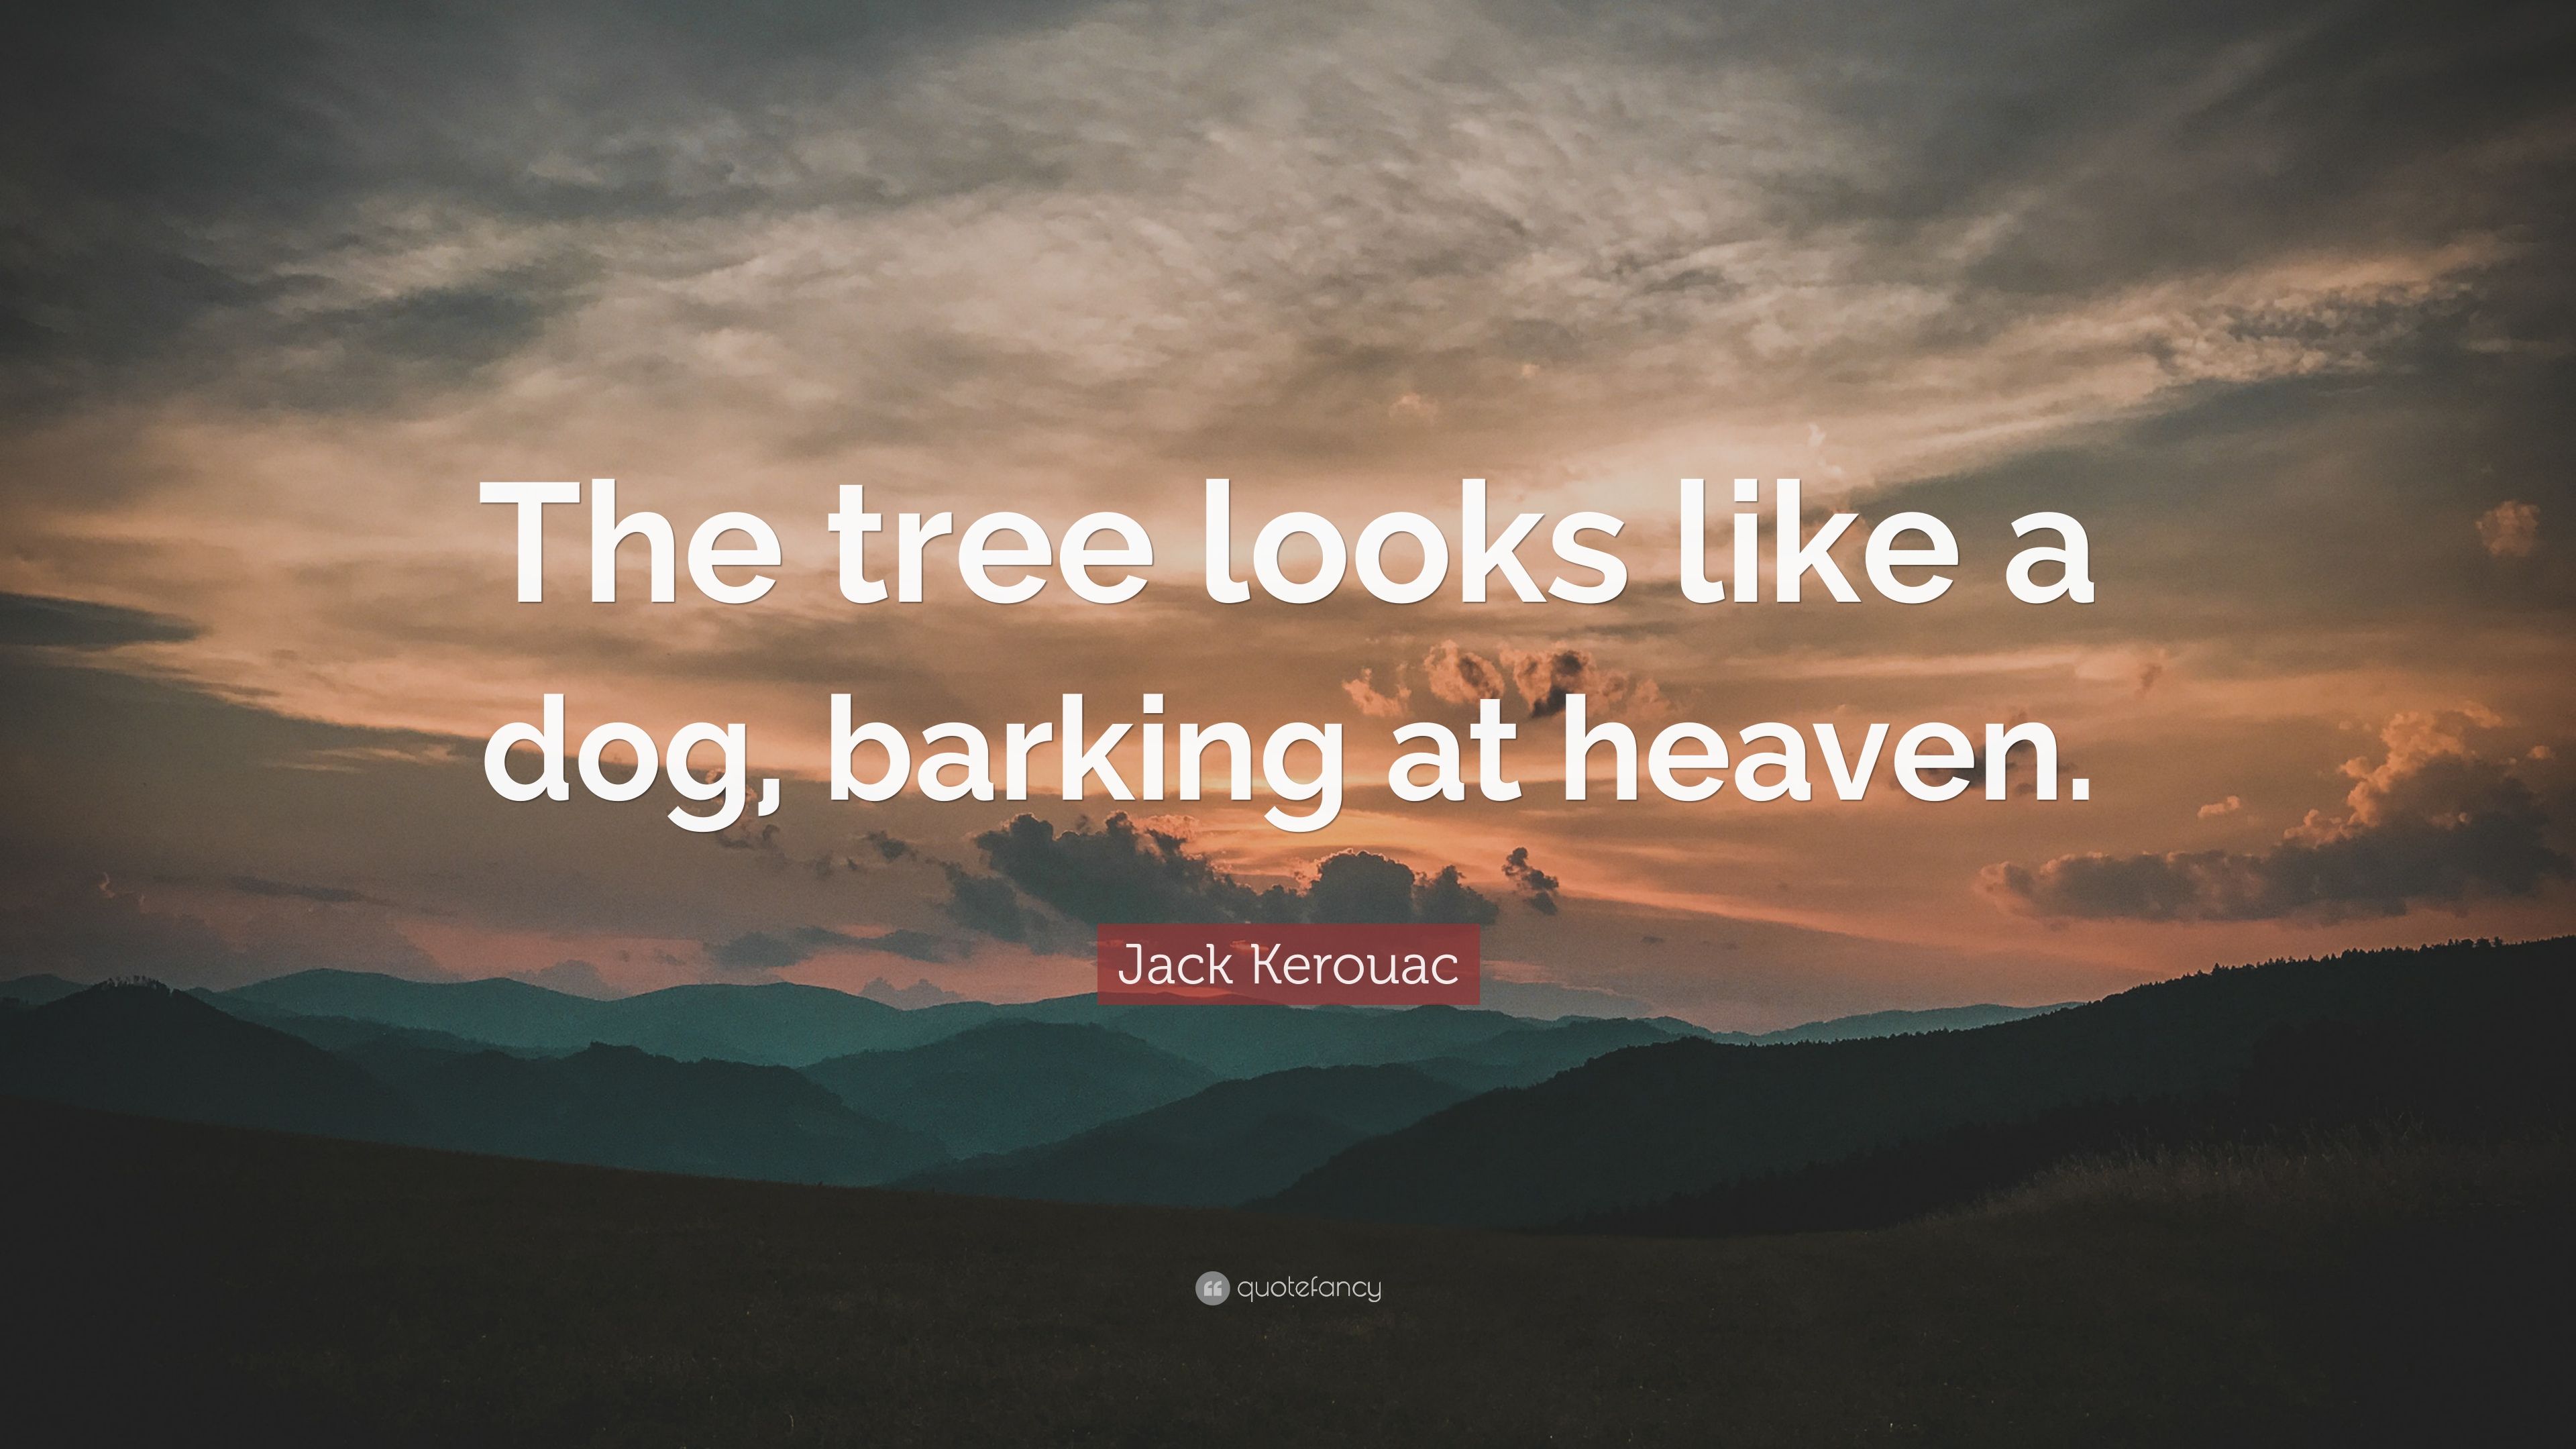 Jack Kerouac Quote: “The tree looks like a dog, barking at heaven ...